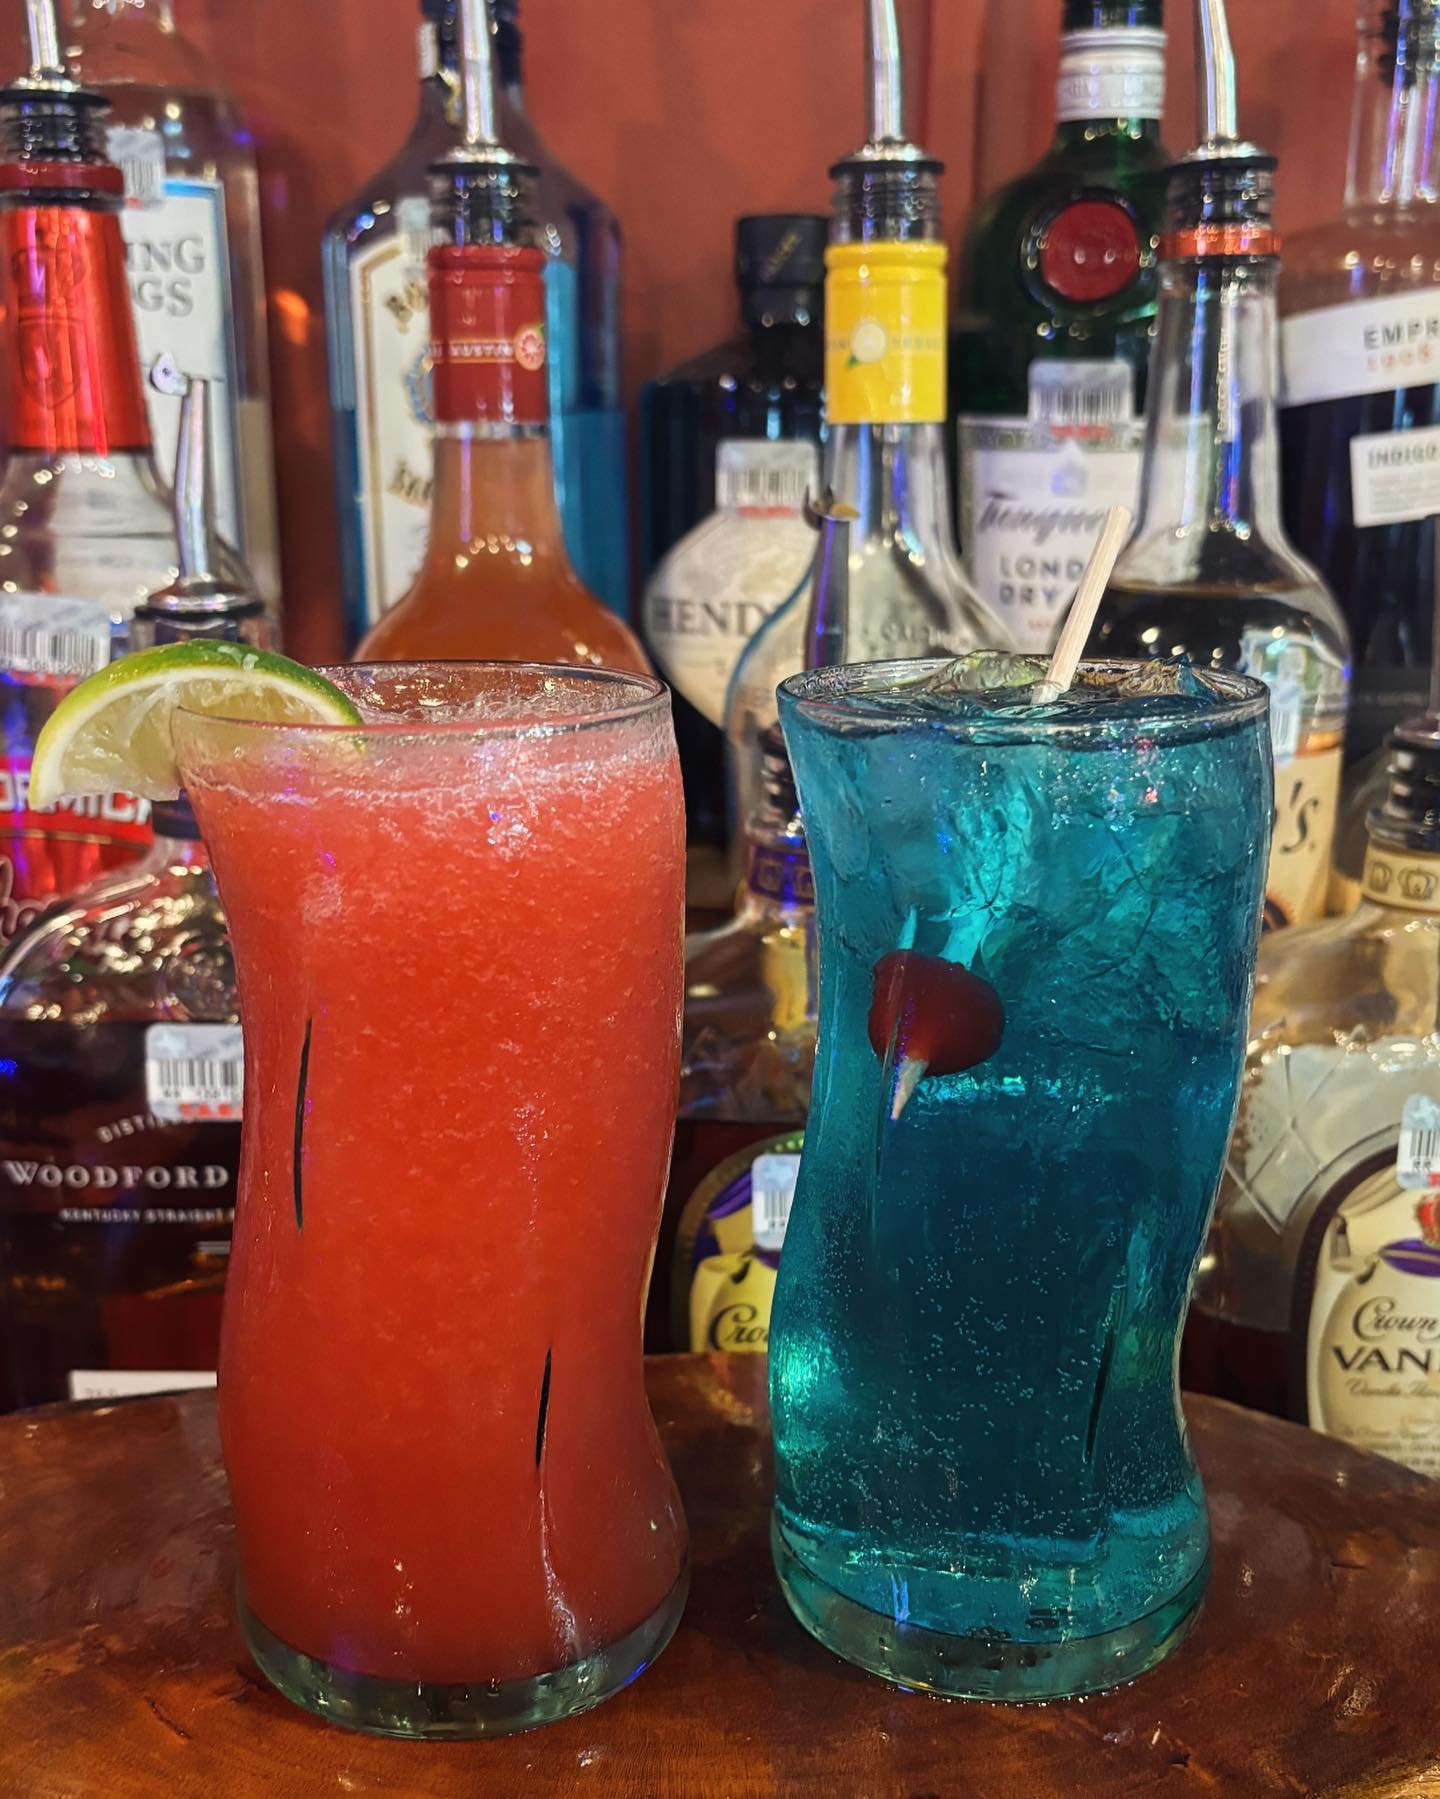 SPECIAL DRINKS 🍹 ‼️ Lightsabers can be red but most are blue. 
If you&rsquo;re a Star Wars fan,
May the Fourth be with you!
Come join us at the Beeville Steakhouse to choose!

The Darkside vs The Jedi